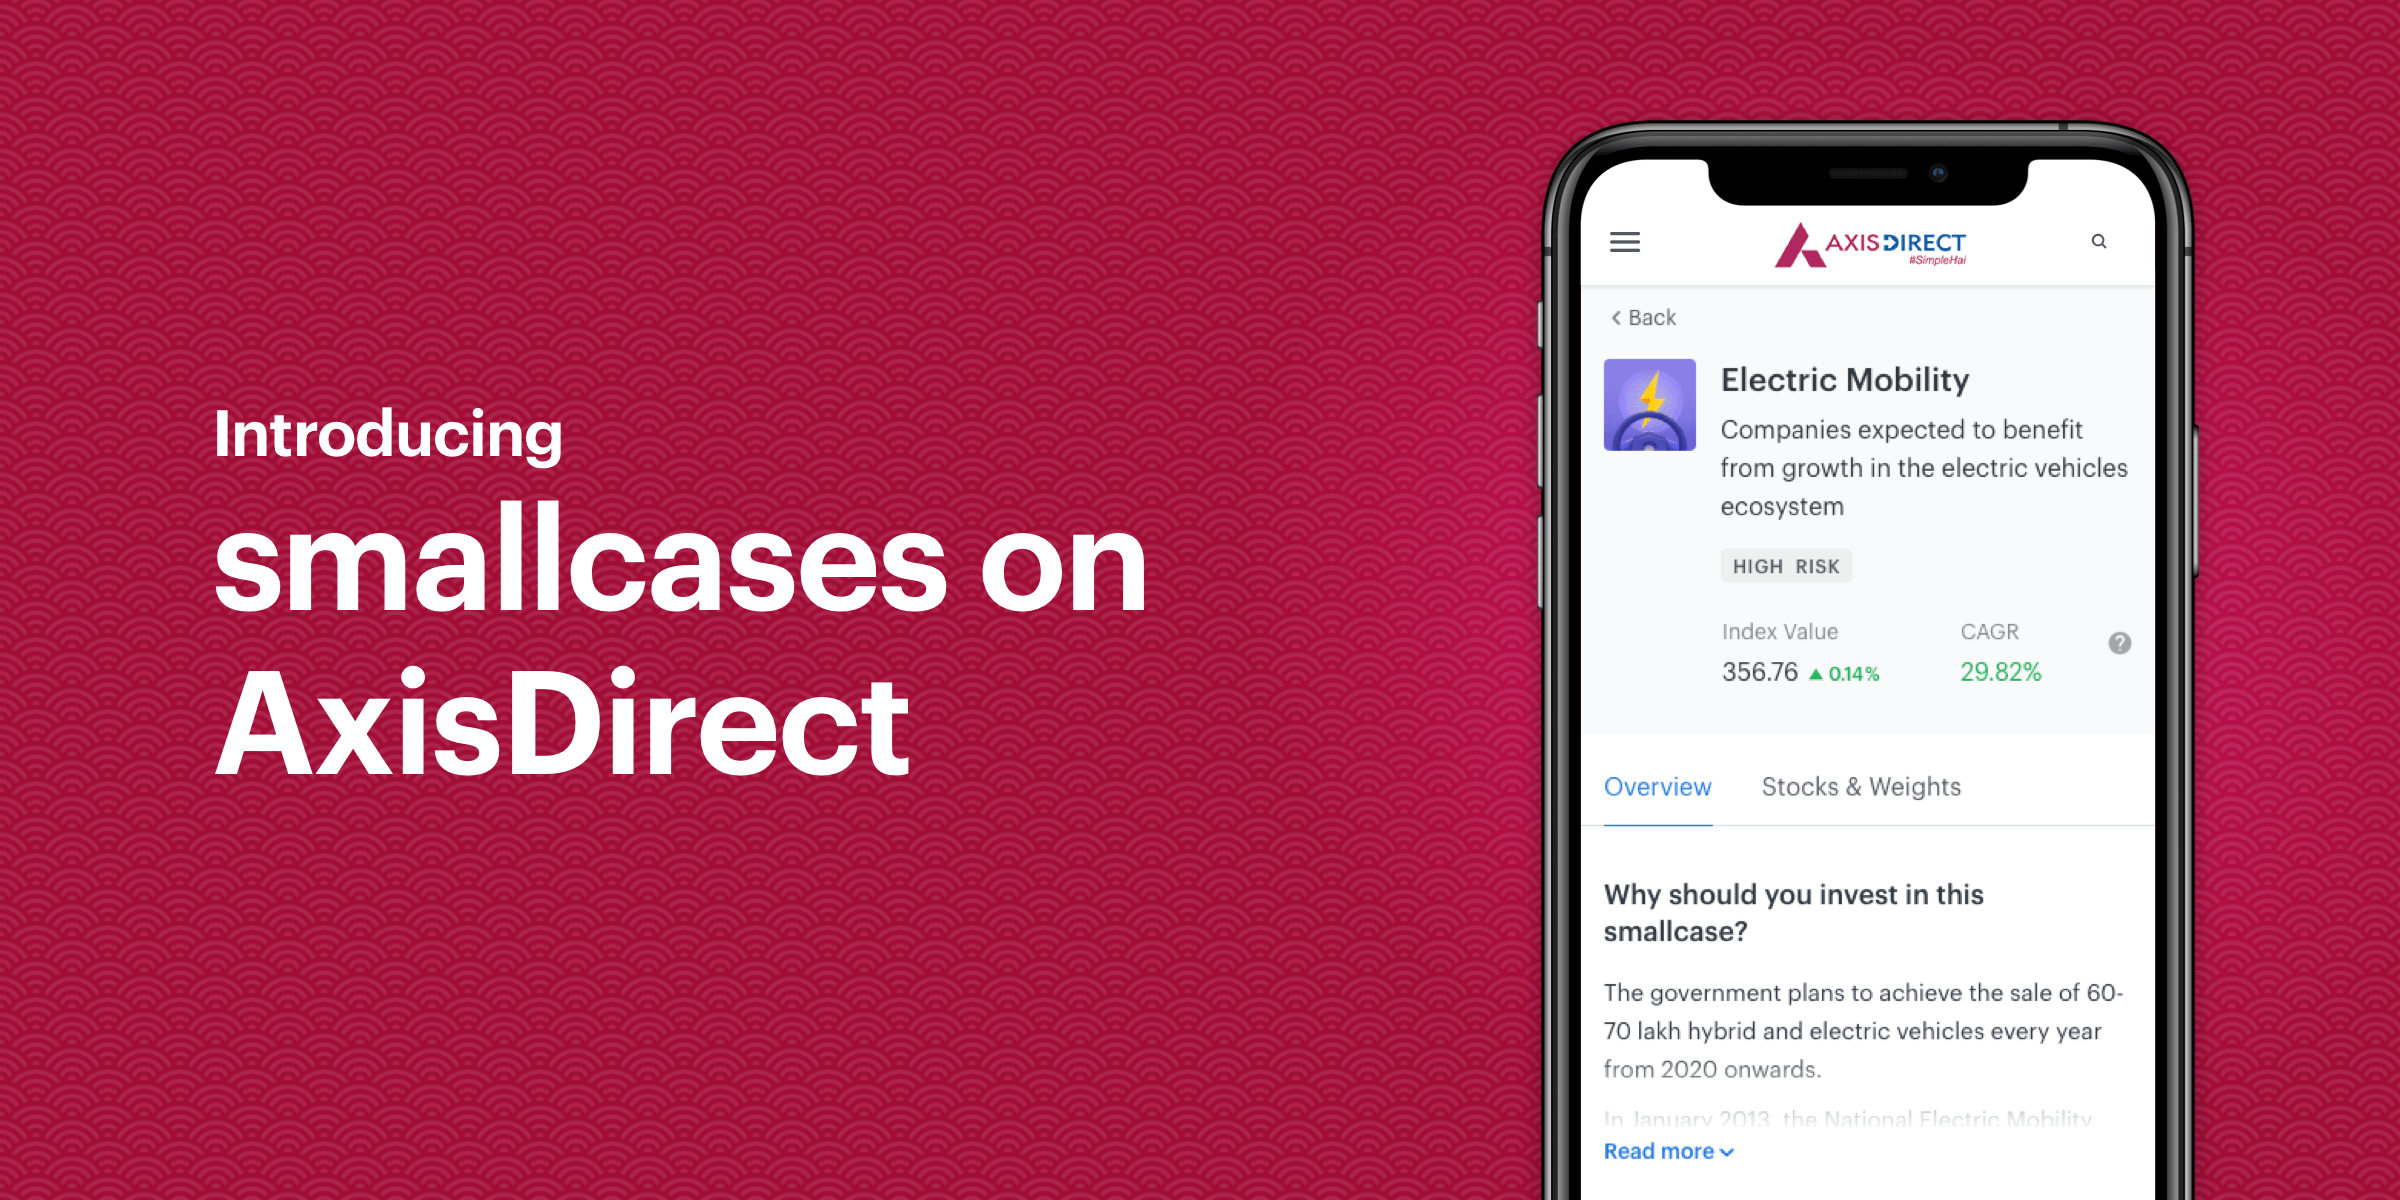 Introducing smallcases on Axis Direct